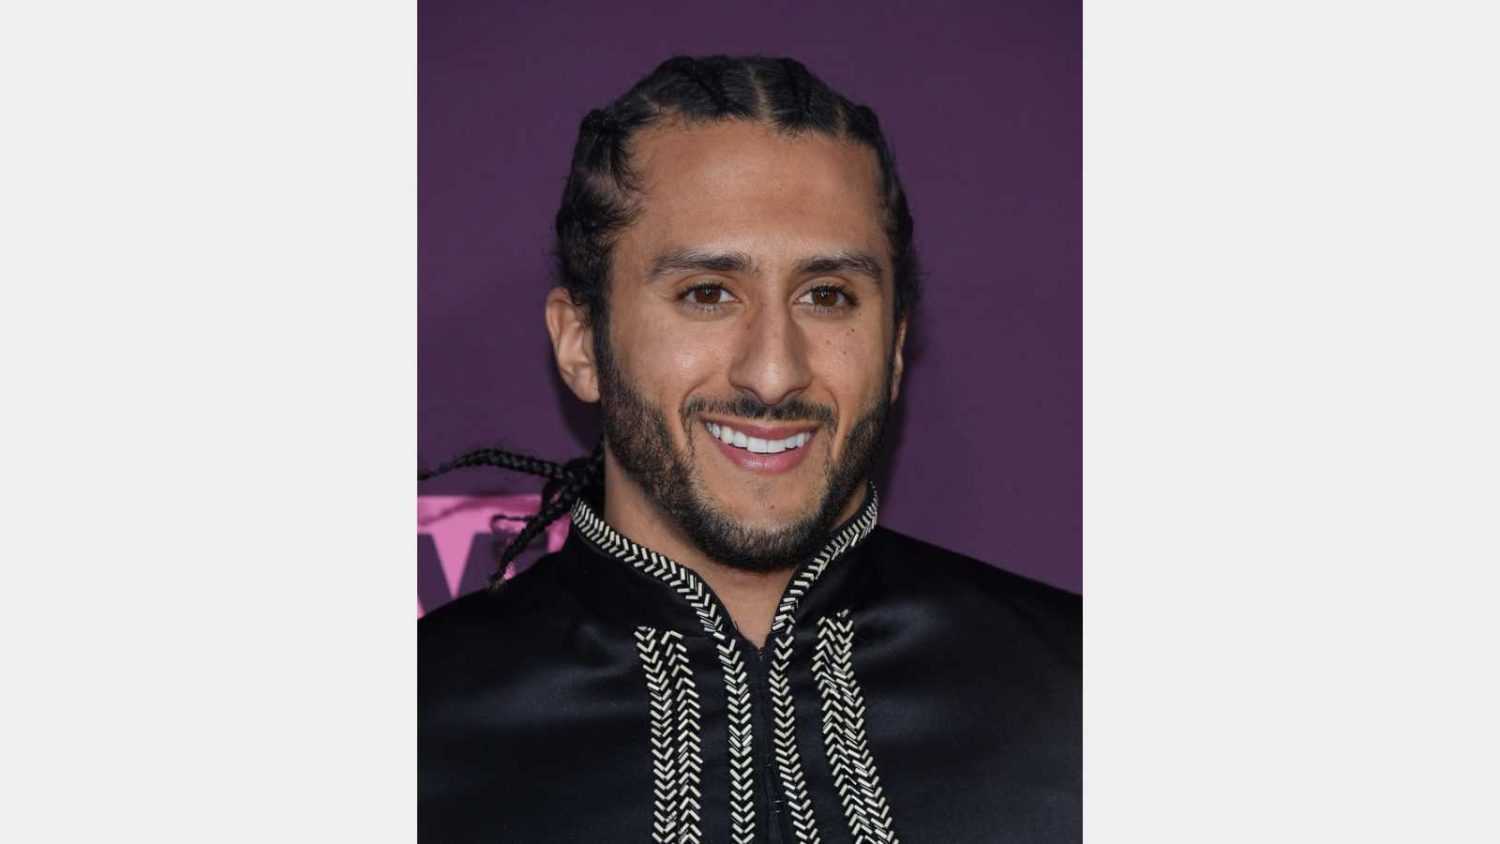 LOS ANGELES - MAY 03: Colin Kaepernick arrives for the VH1's 3rd Annual 'Dear Mama: A Love Letter to Moms' on May 3, 2018 in Los Angeles, CA